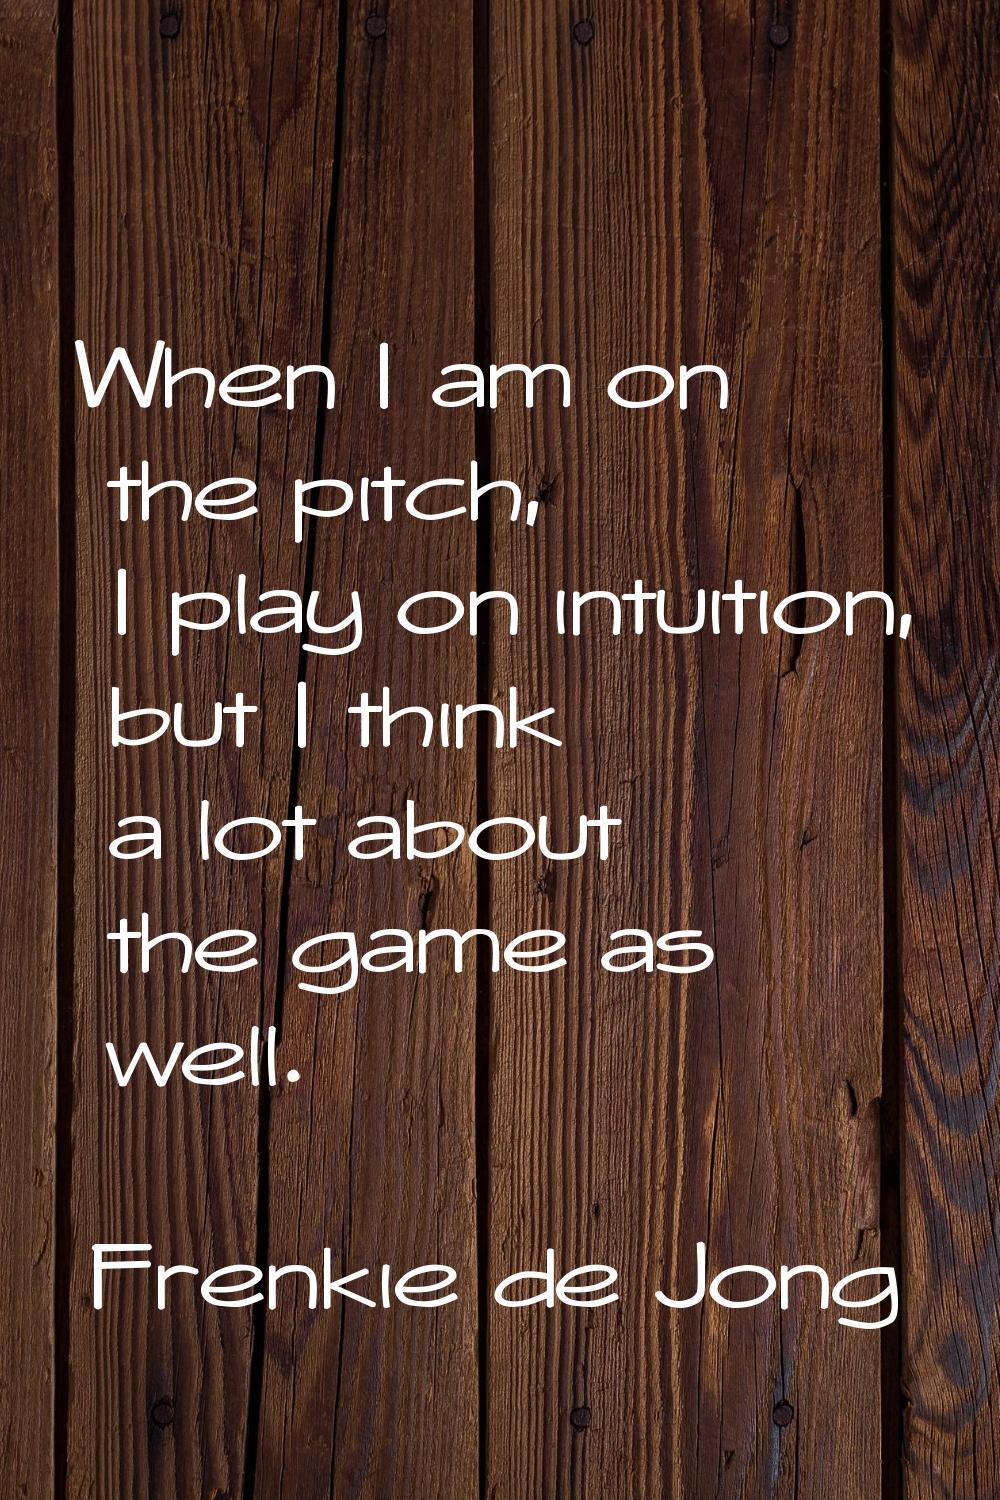 When I am on the pitch, I play on intuition, but I think a lot about the game as well.